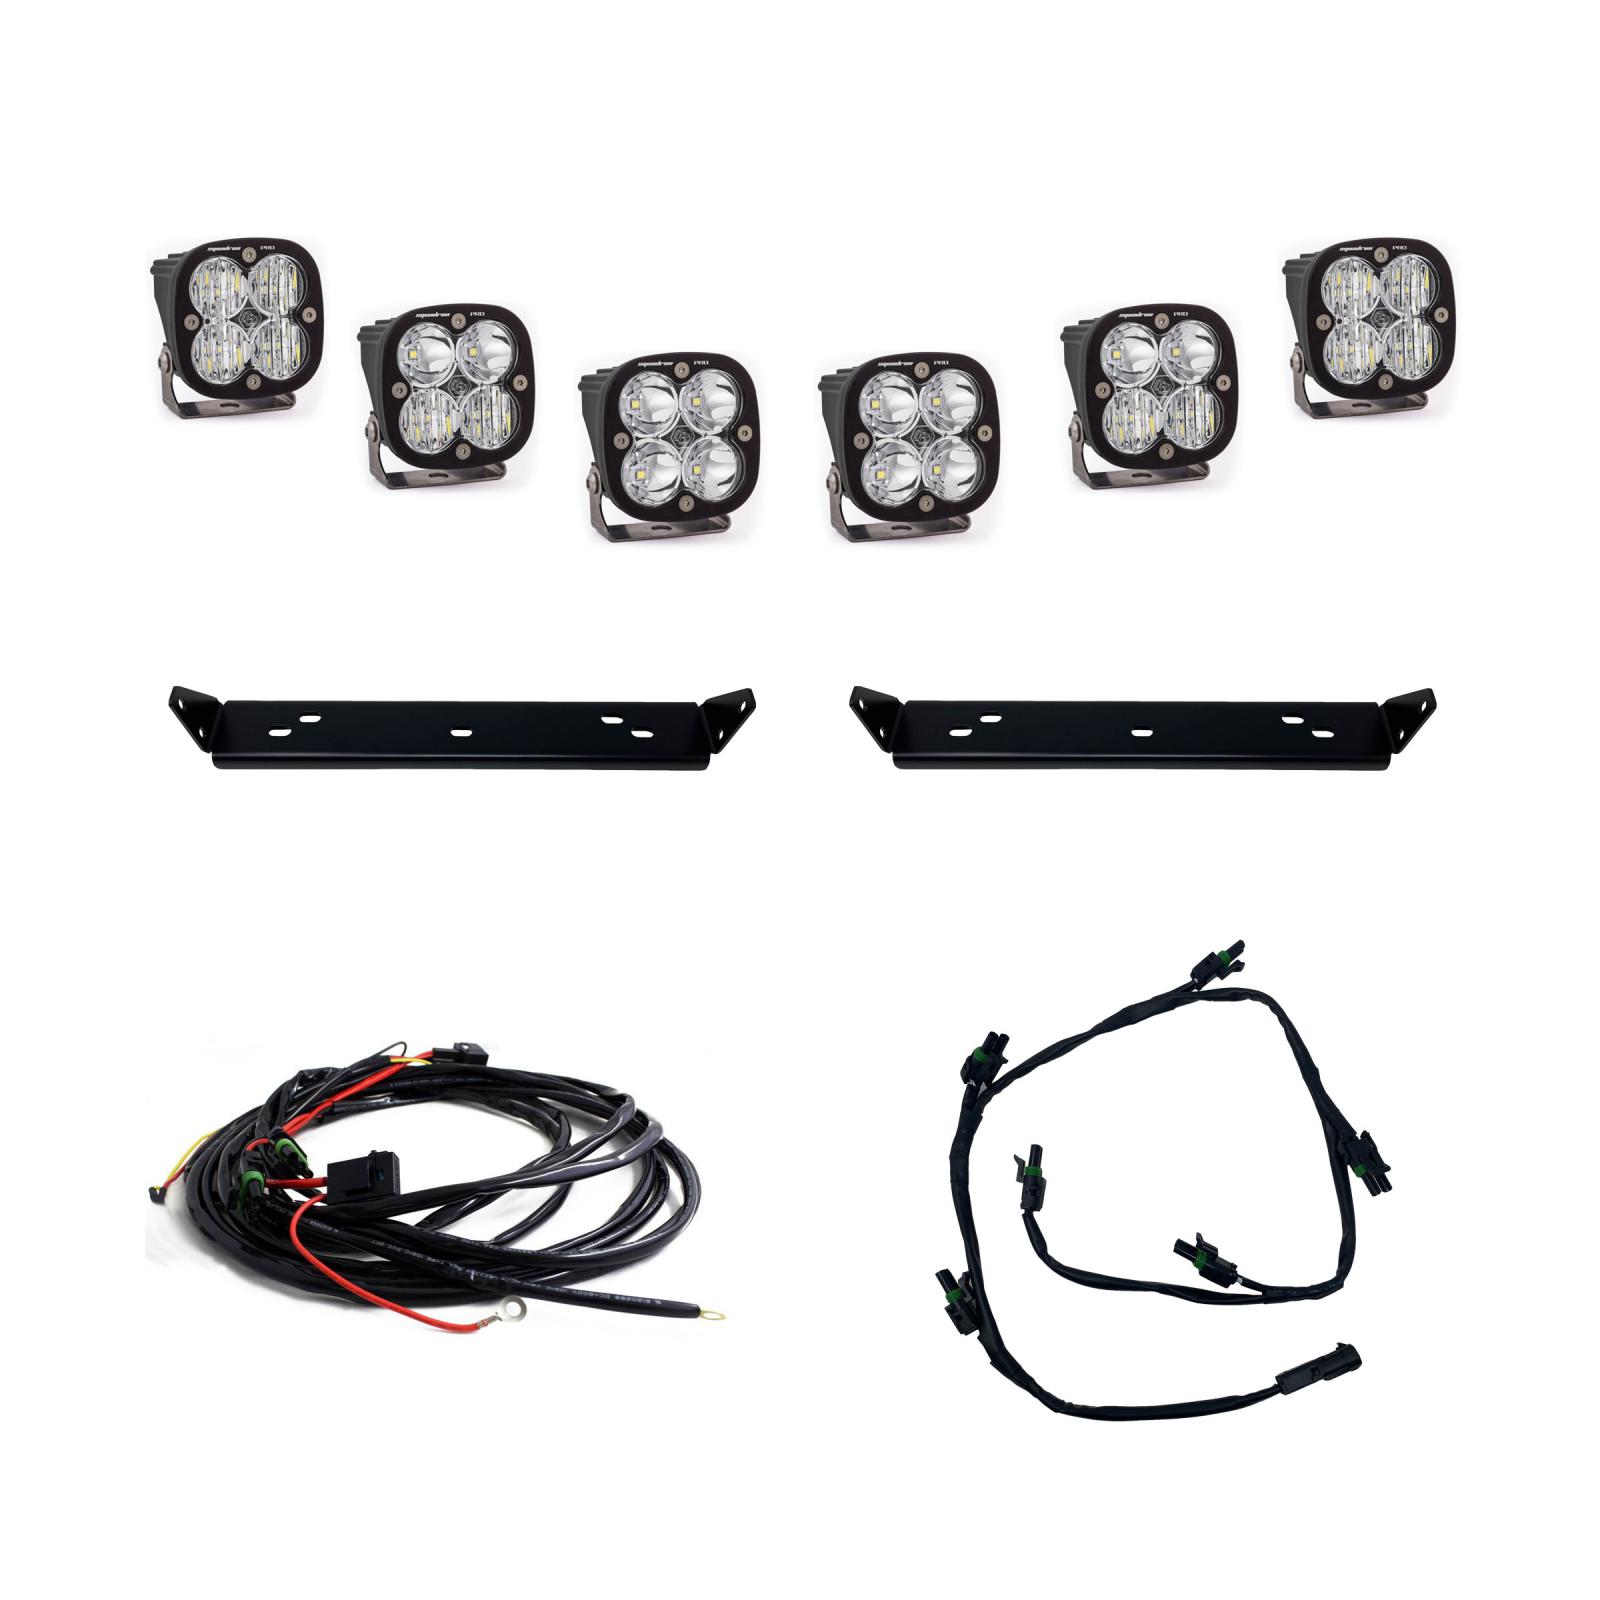 All components of Baja Designs Ford Squadron Pro Behind Grille Light Kit - Ford 2021-22 F-150 Raptor